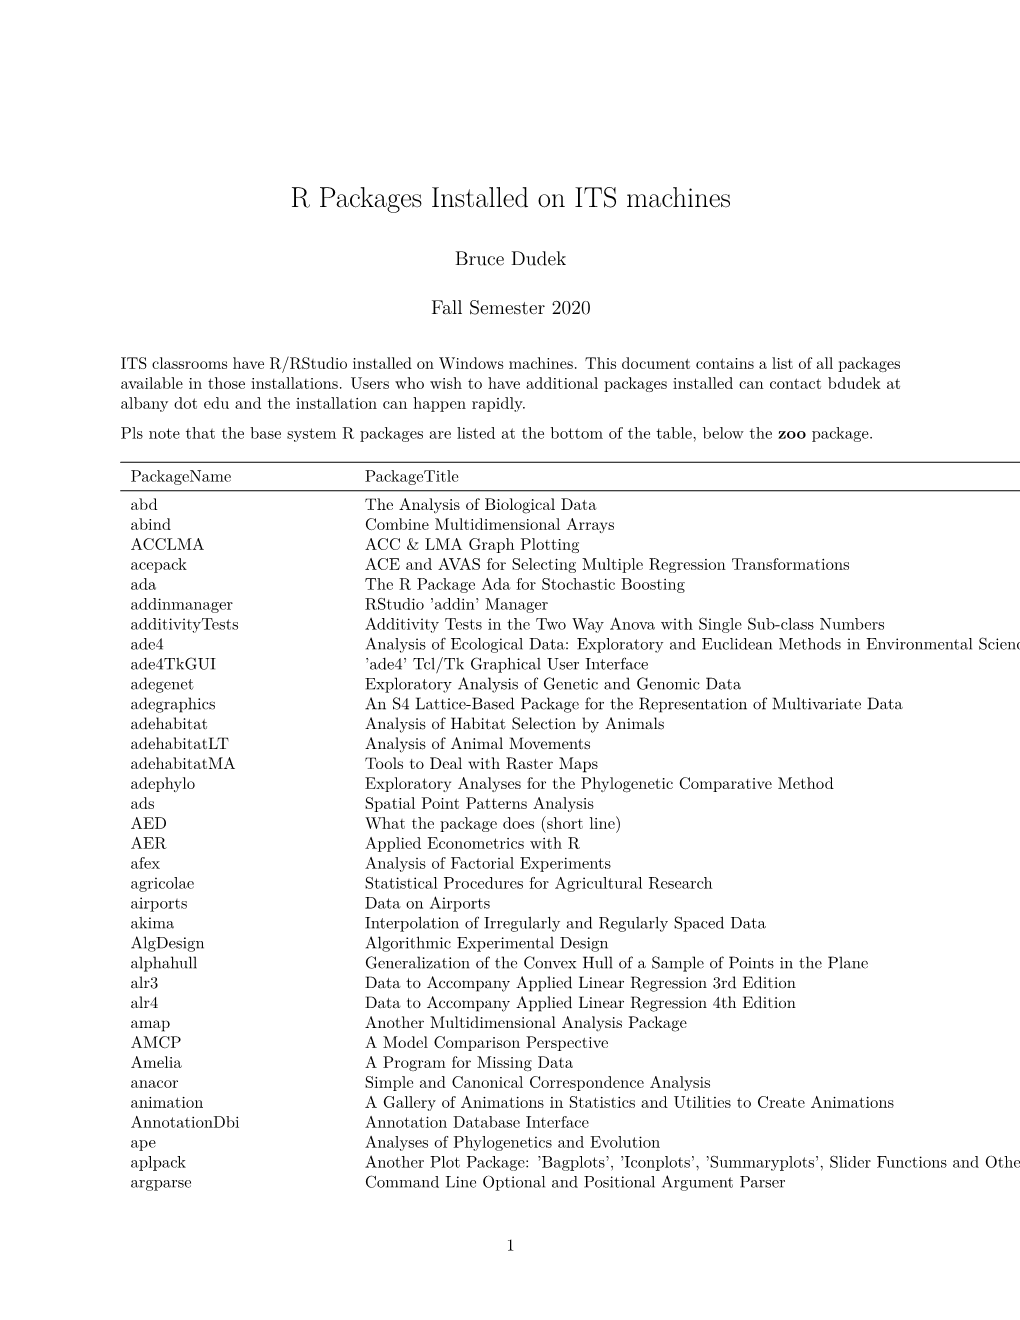 R Packages Installed on ITS Machines